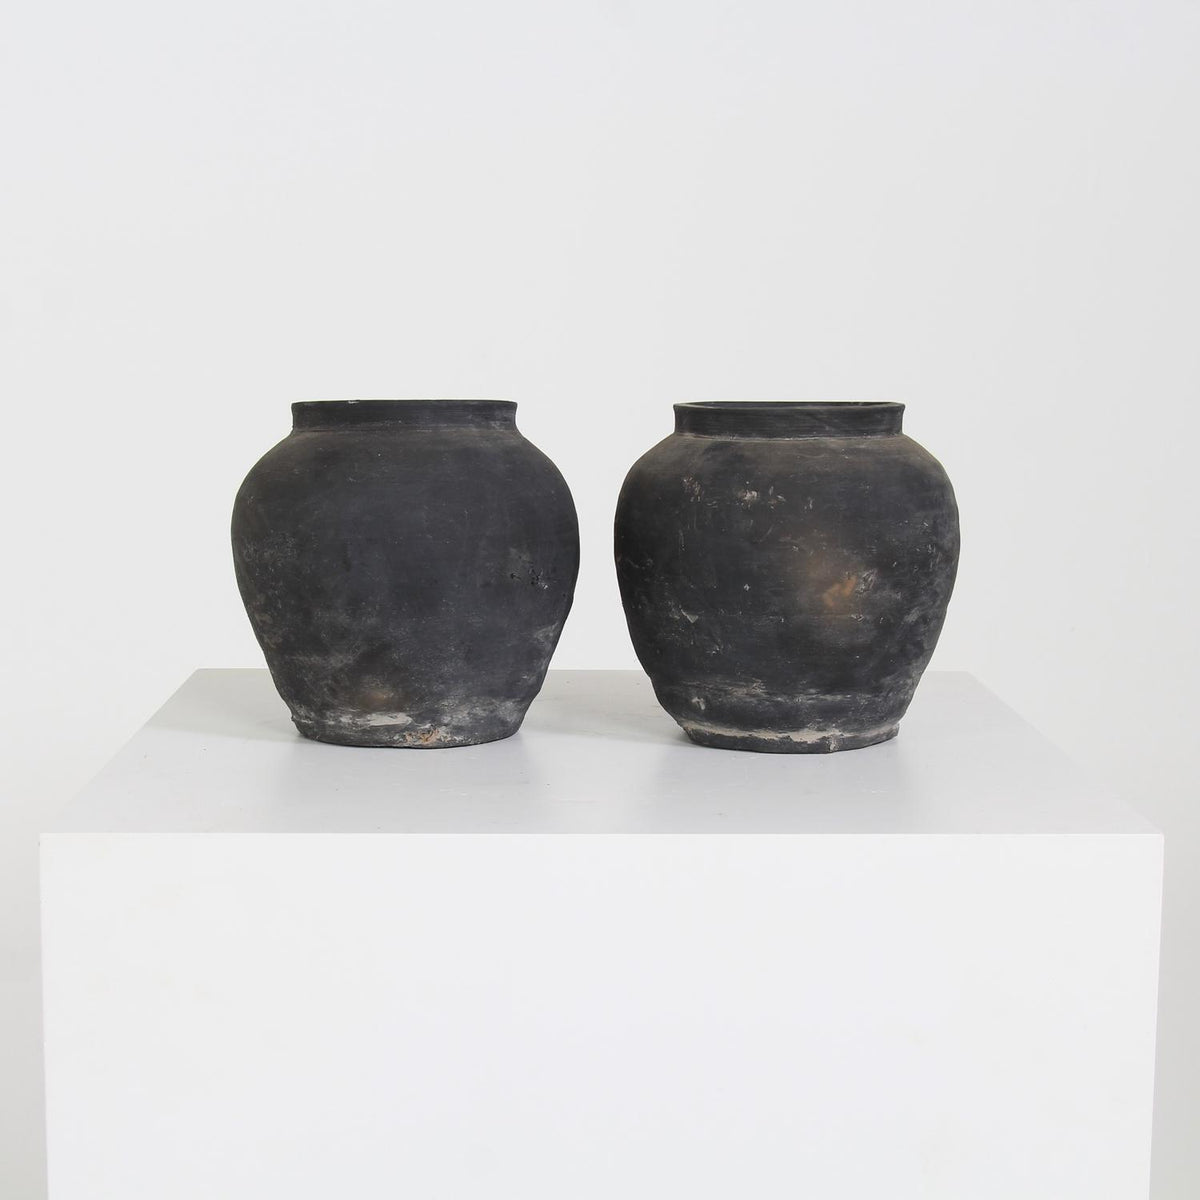 COLLECTION OF TWO CHINESE WABI-SABI BLACK POTTERY JARS